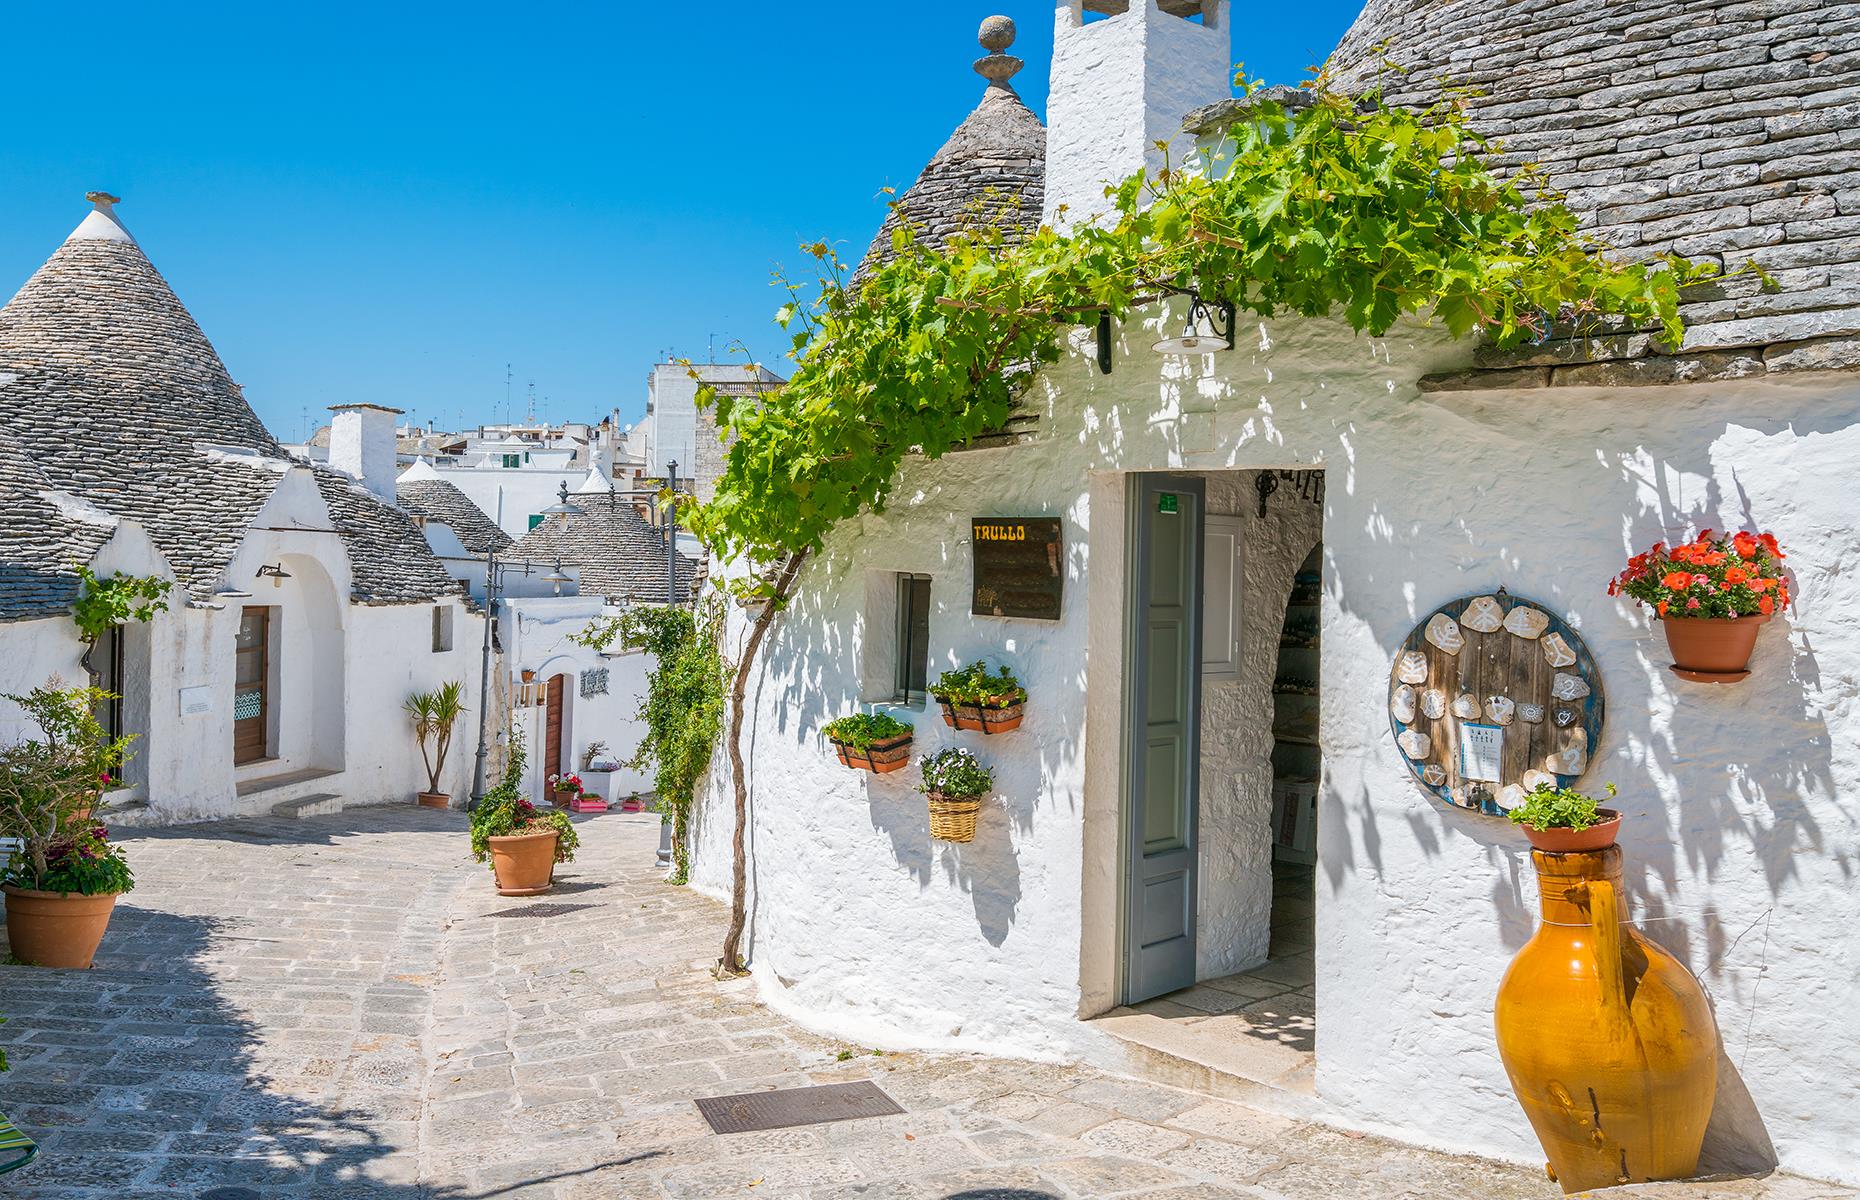 Slide 9 of 31: It's almost impossible not to find a picture-perfect street in Alberobello, a UNESCO World Heritage Site in its entirety. The small town in Italy's heel – Puglia – is famous for its unusual trulli houses, built from whitewashed local limestone, with conical roofs.